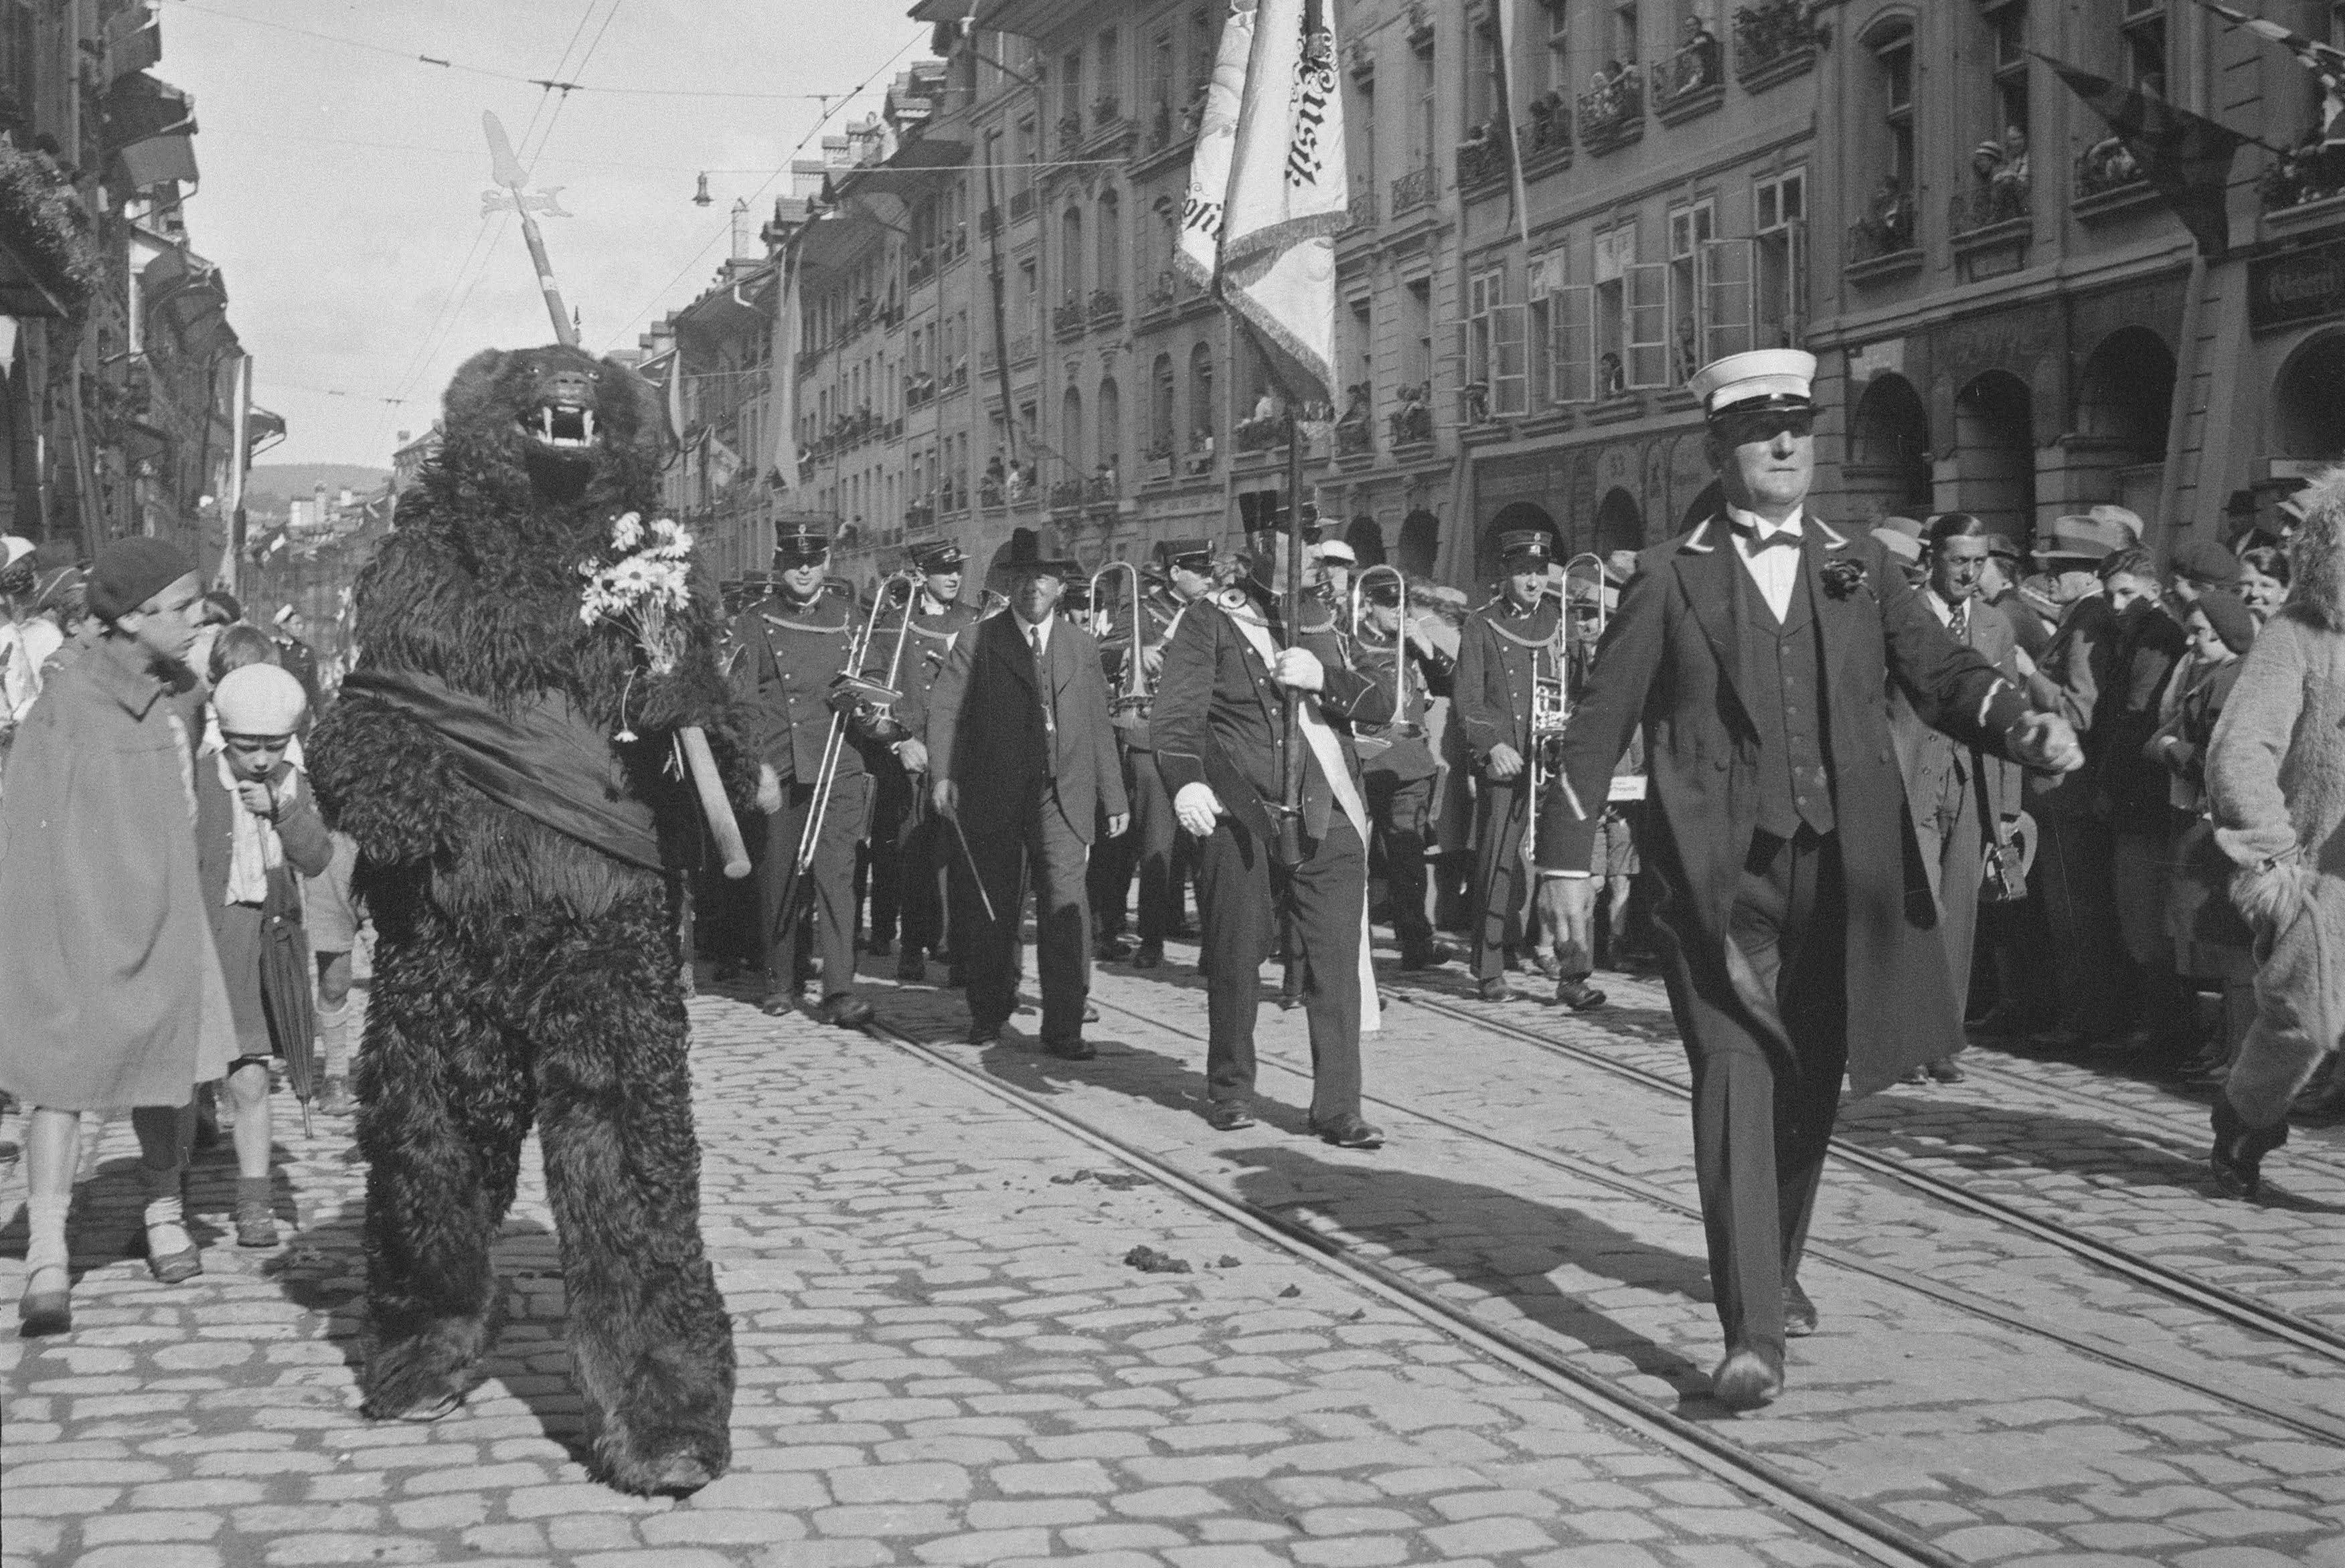 The University of Bern celebrates its 100th anniversary in 1934: Procession, student fraternity with bear in the old town © Carl Jost/Staatsarchiv Bern